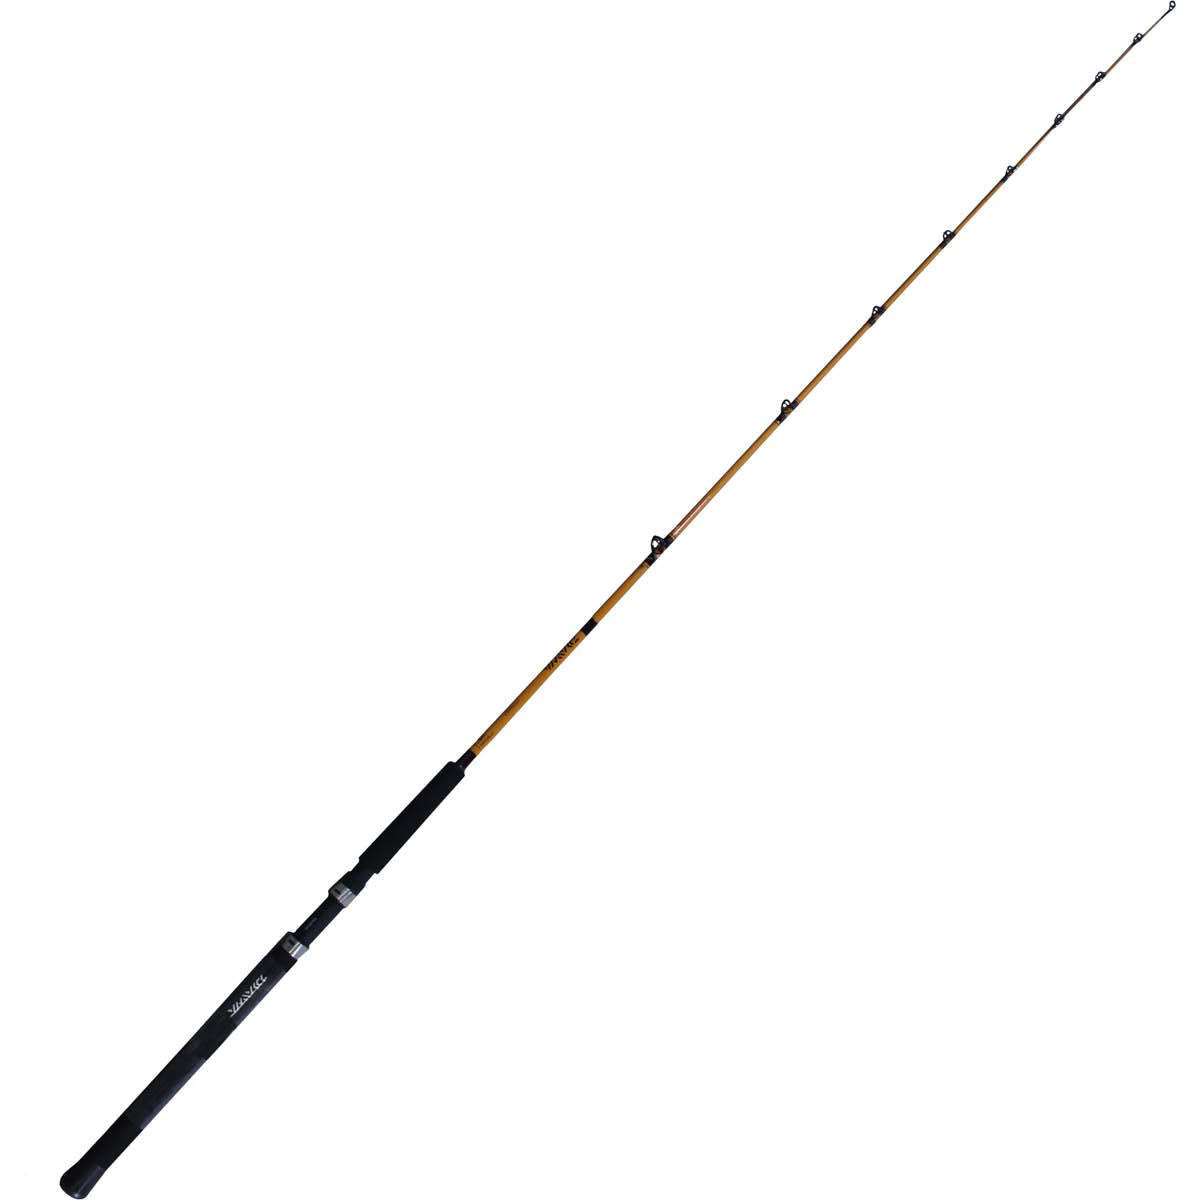 Photo of Daiwa FT Trolling Series Walleye Rod for sale at United Tackle Shops.